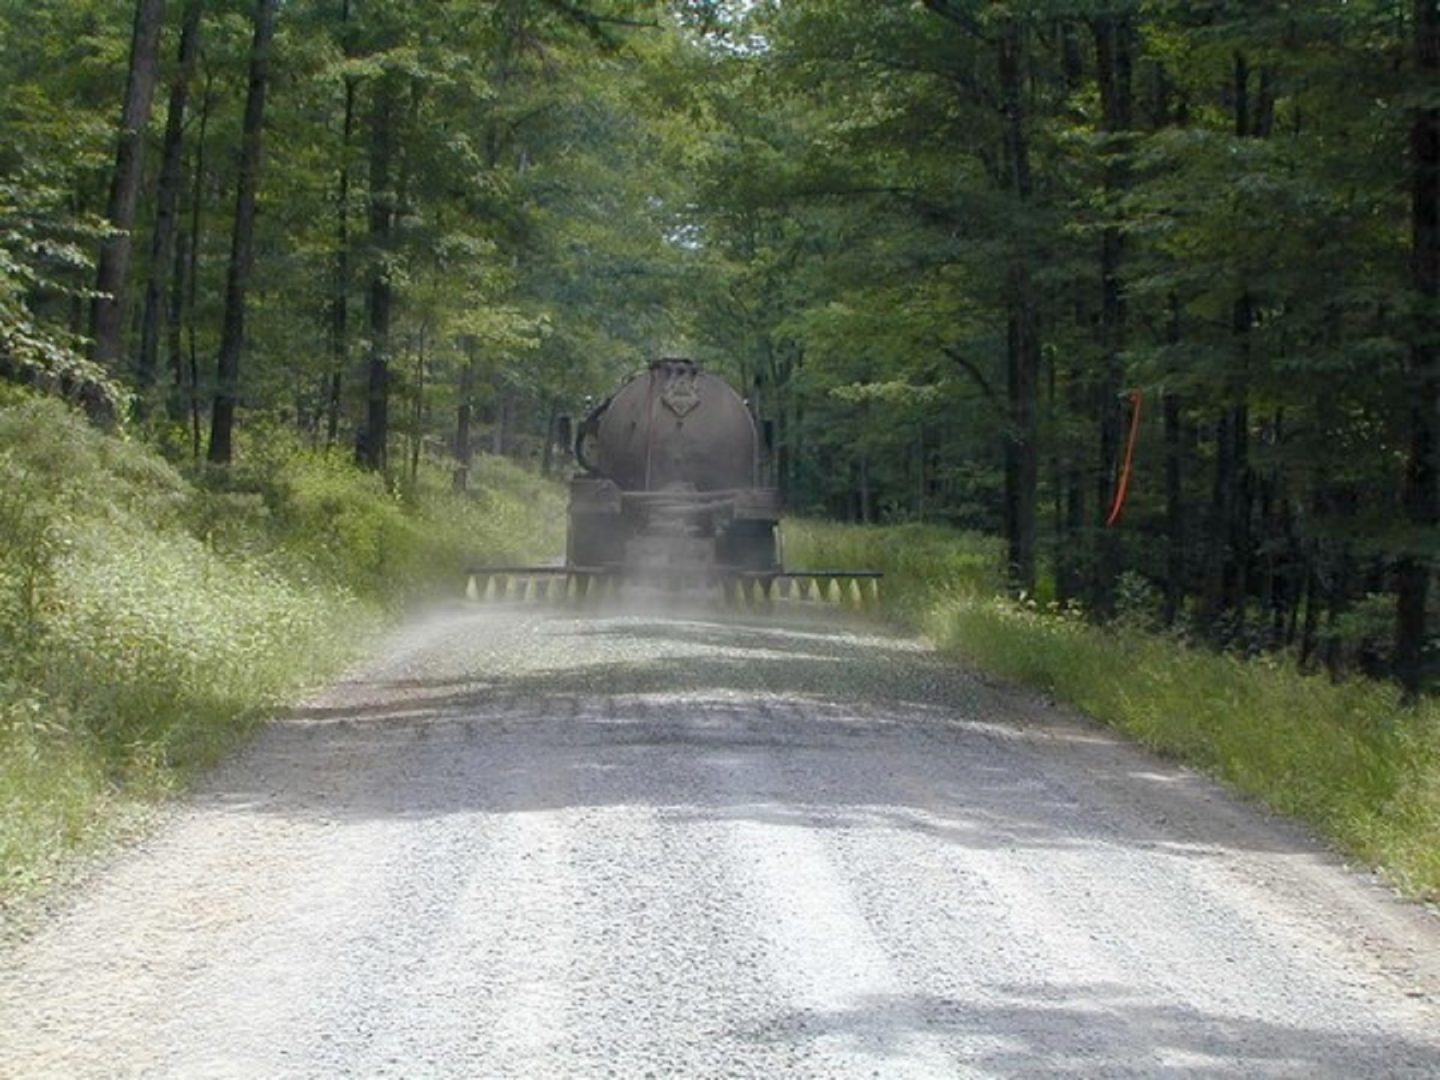 A truck sprays a dust suppressant on a dirt road in Pennsylvania. Some communities in Northwest Pennsylvania use conventional oil and gas waste as a suppressant. 